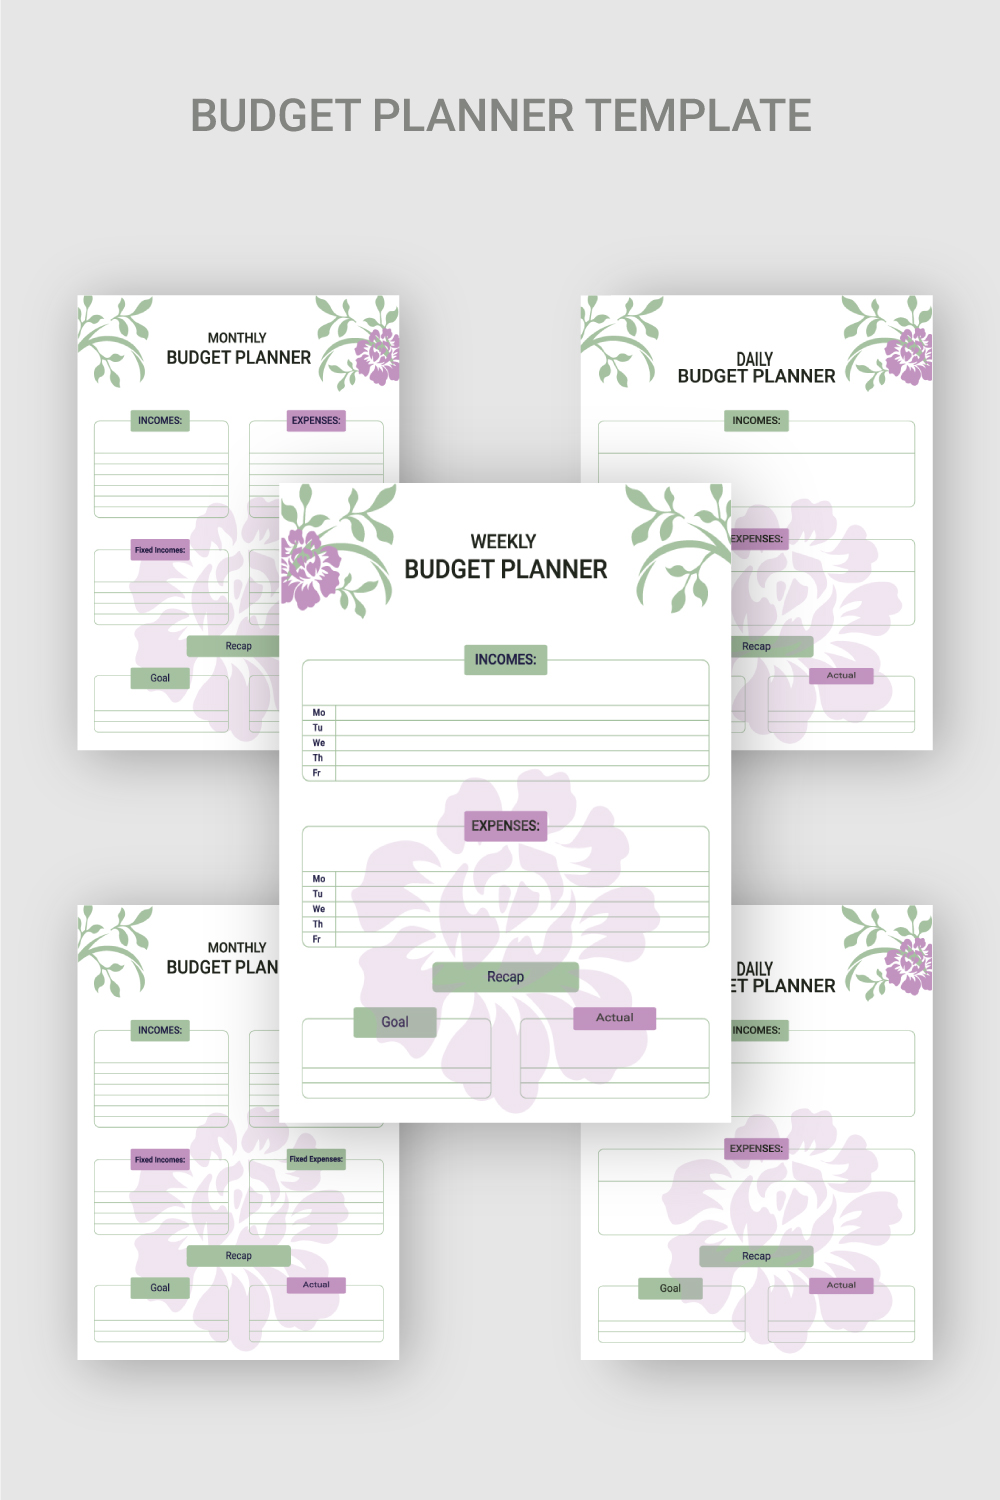 Monthly Weekly and Daily Budget Planner Templates pinterest image.